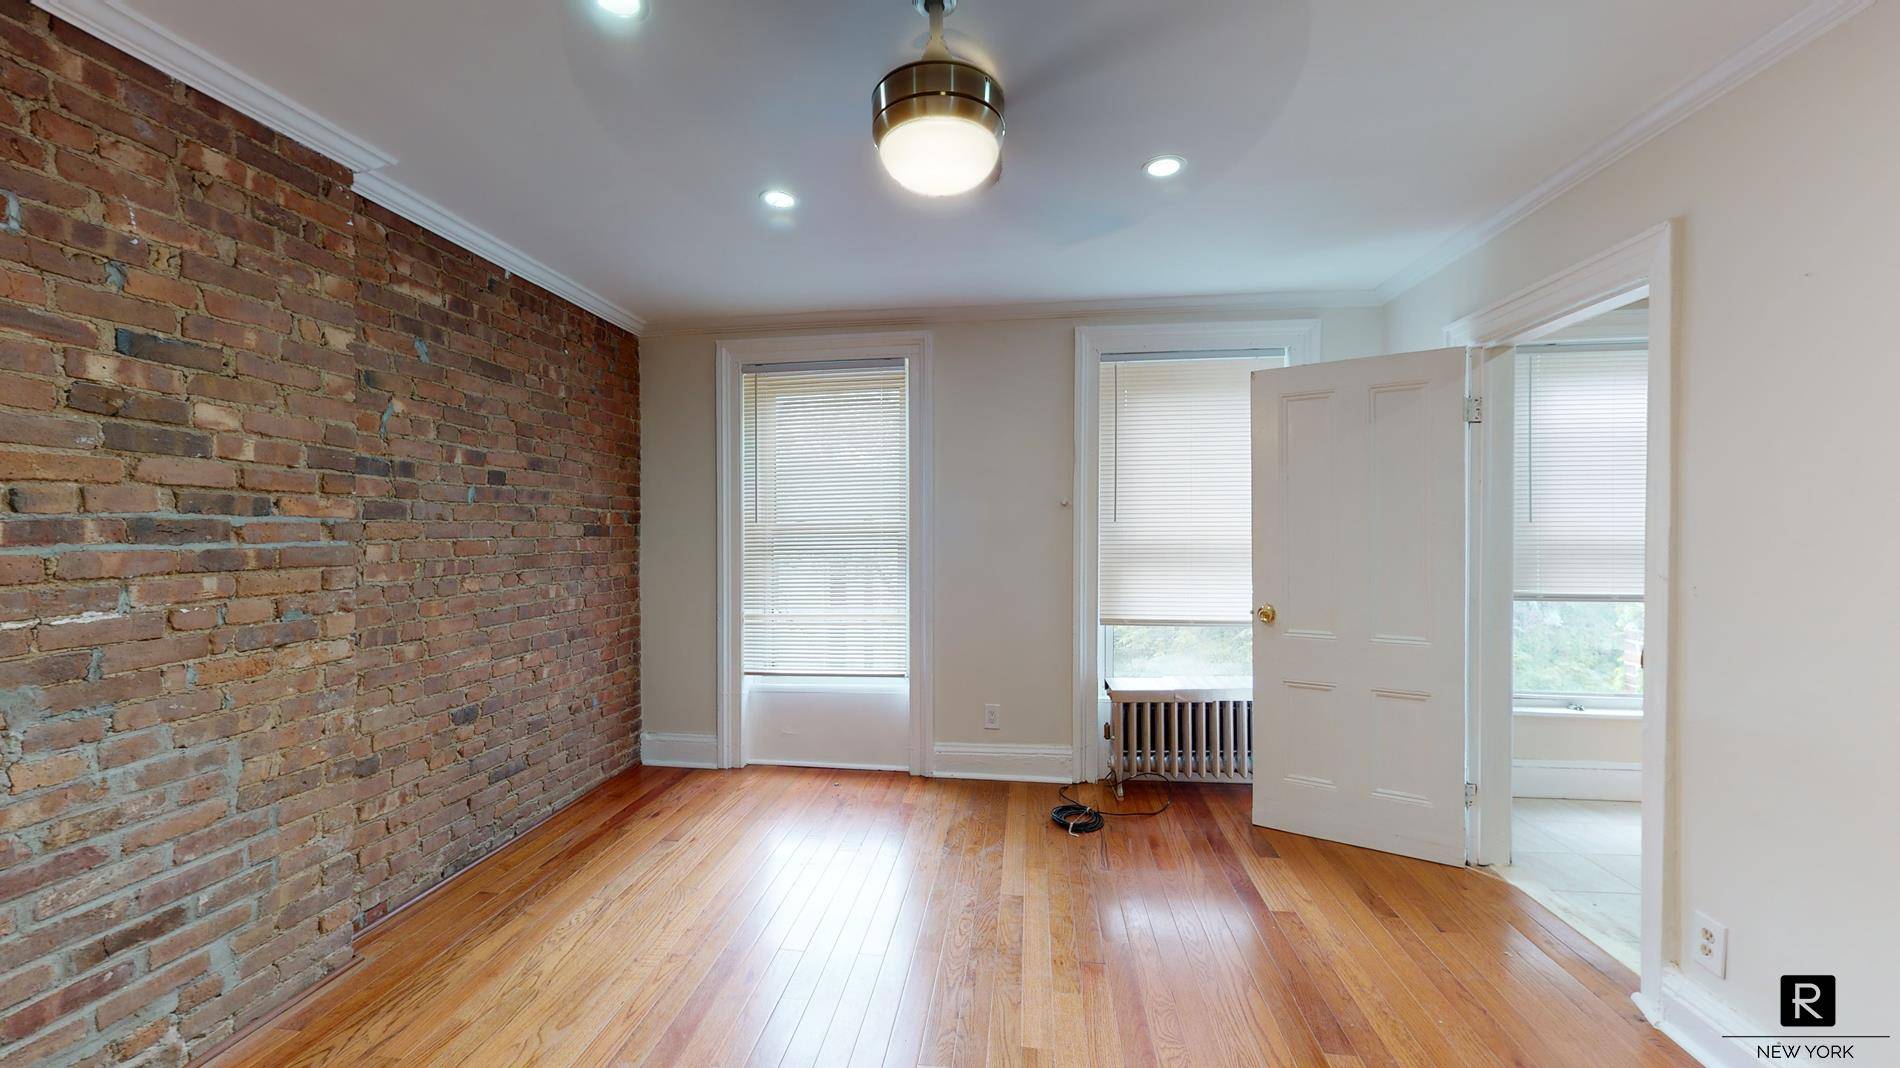 Newly renovated apartment in historic Clinton Hill.